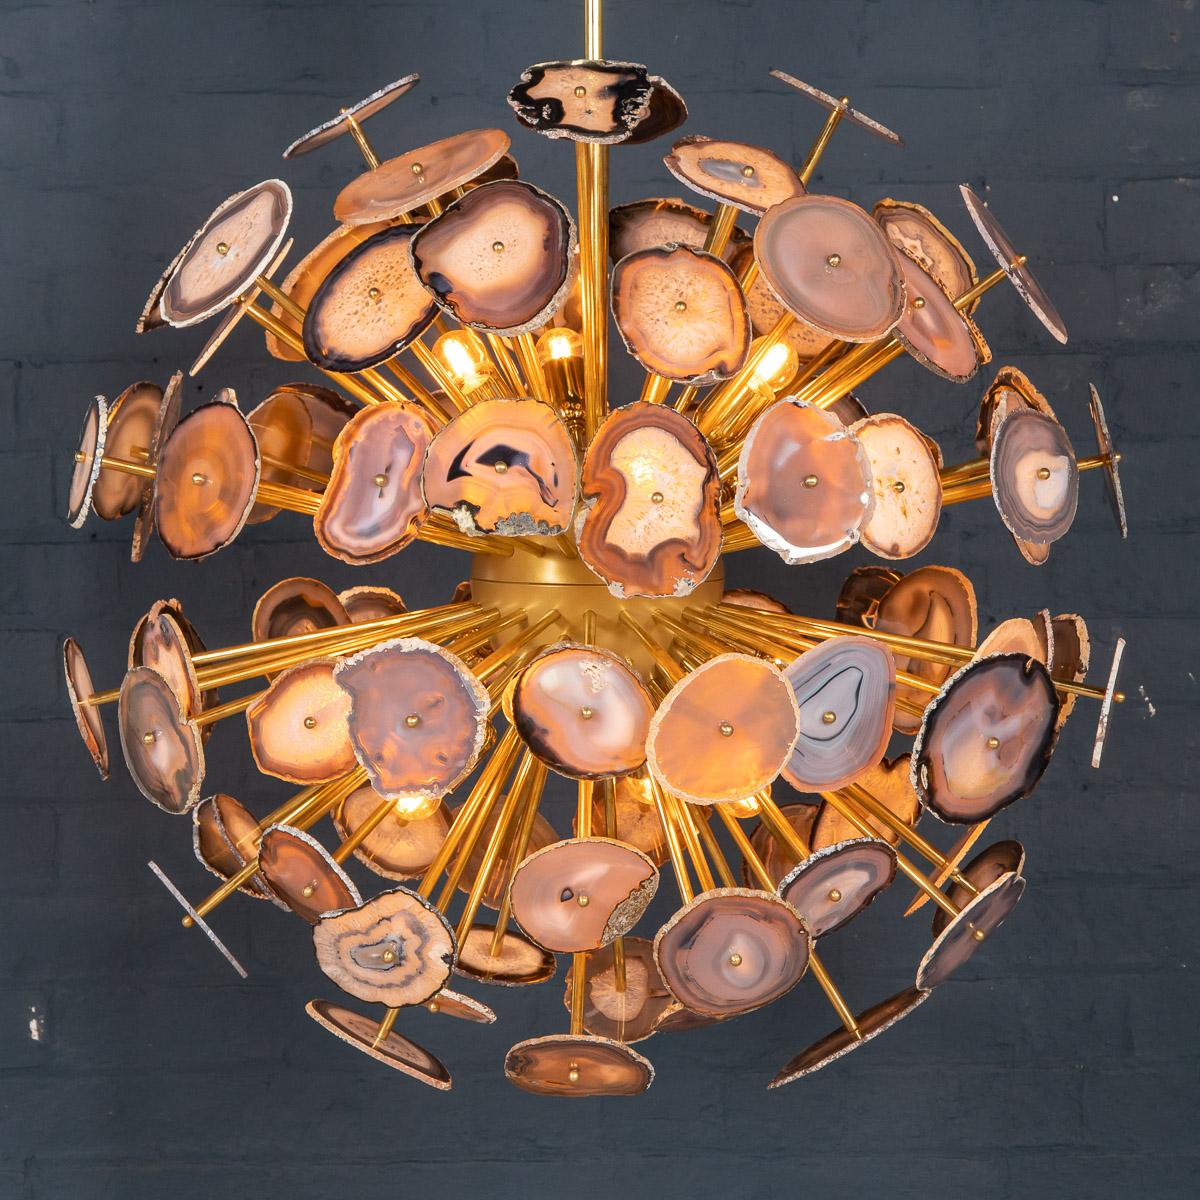 A very stylish and unusual “Sputnik” chandelier made out of sections of Brazilian agate. The structure itself is made out of brass and is of exceptional quality. As a piece of architectural design inspired by nature, it is a striking addition to any